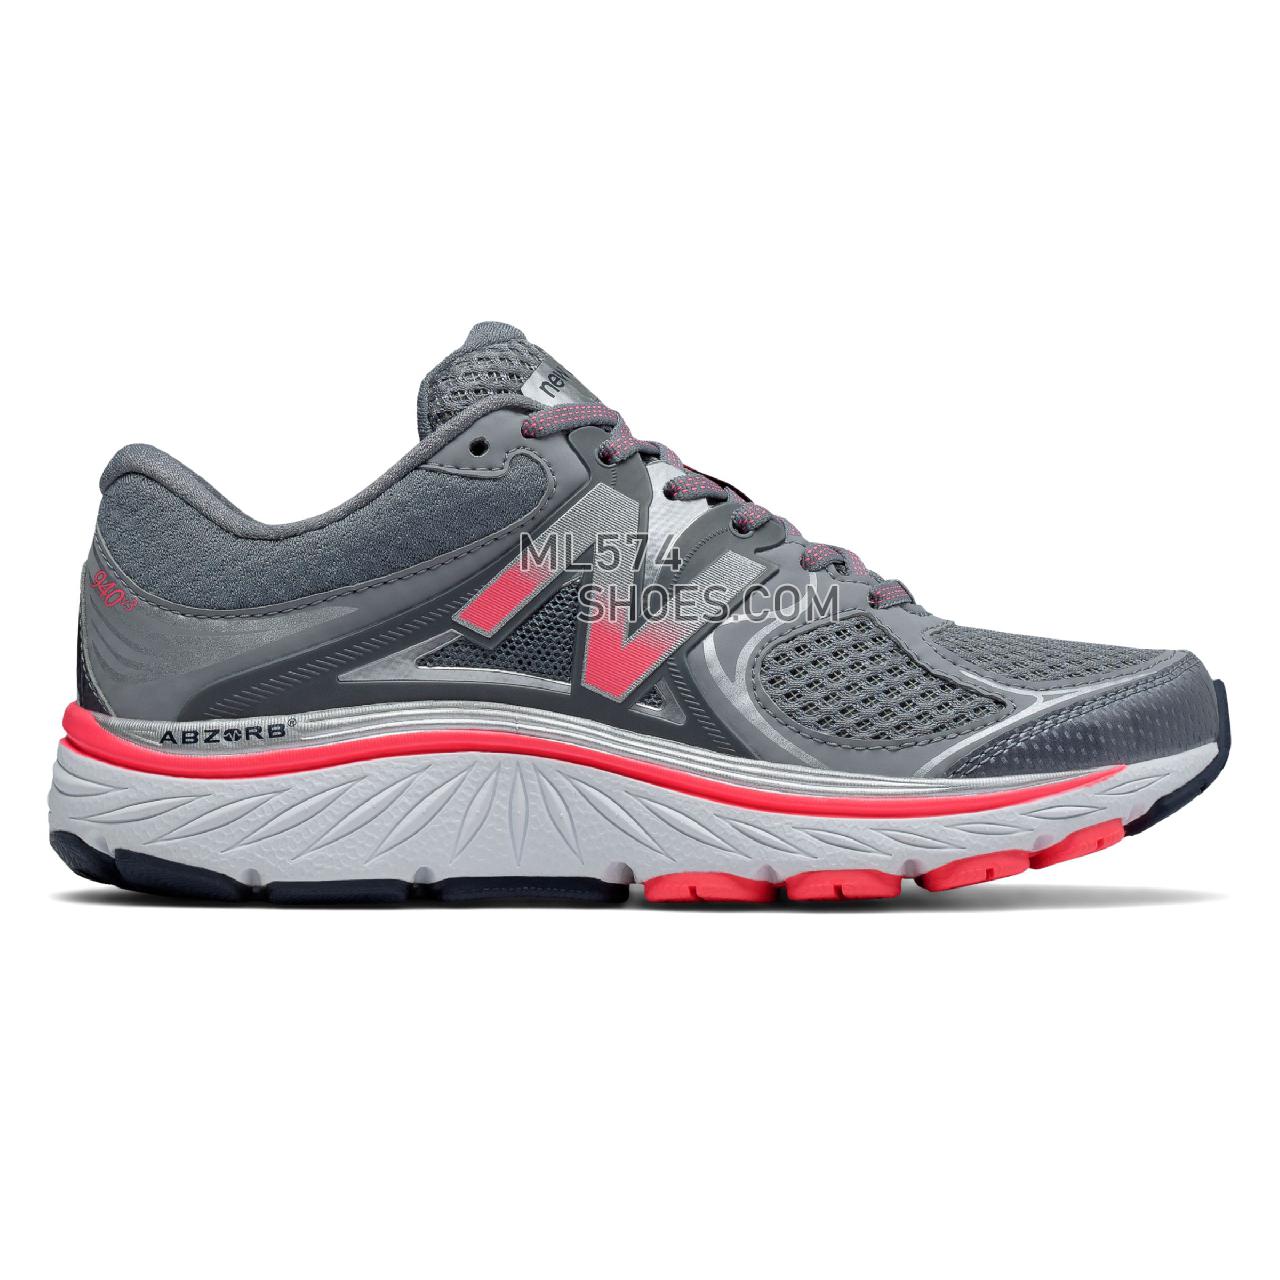 New Balance 940v3 - Women's 940 - Running Silver with Guava and Grey - W940GP3